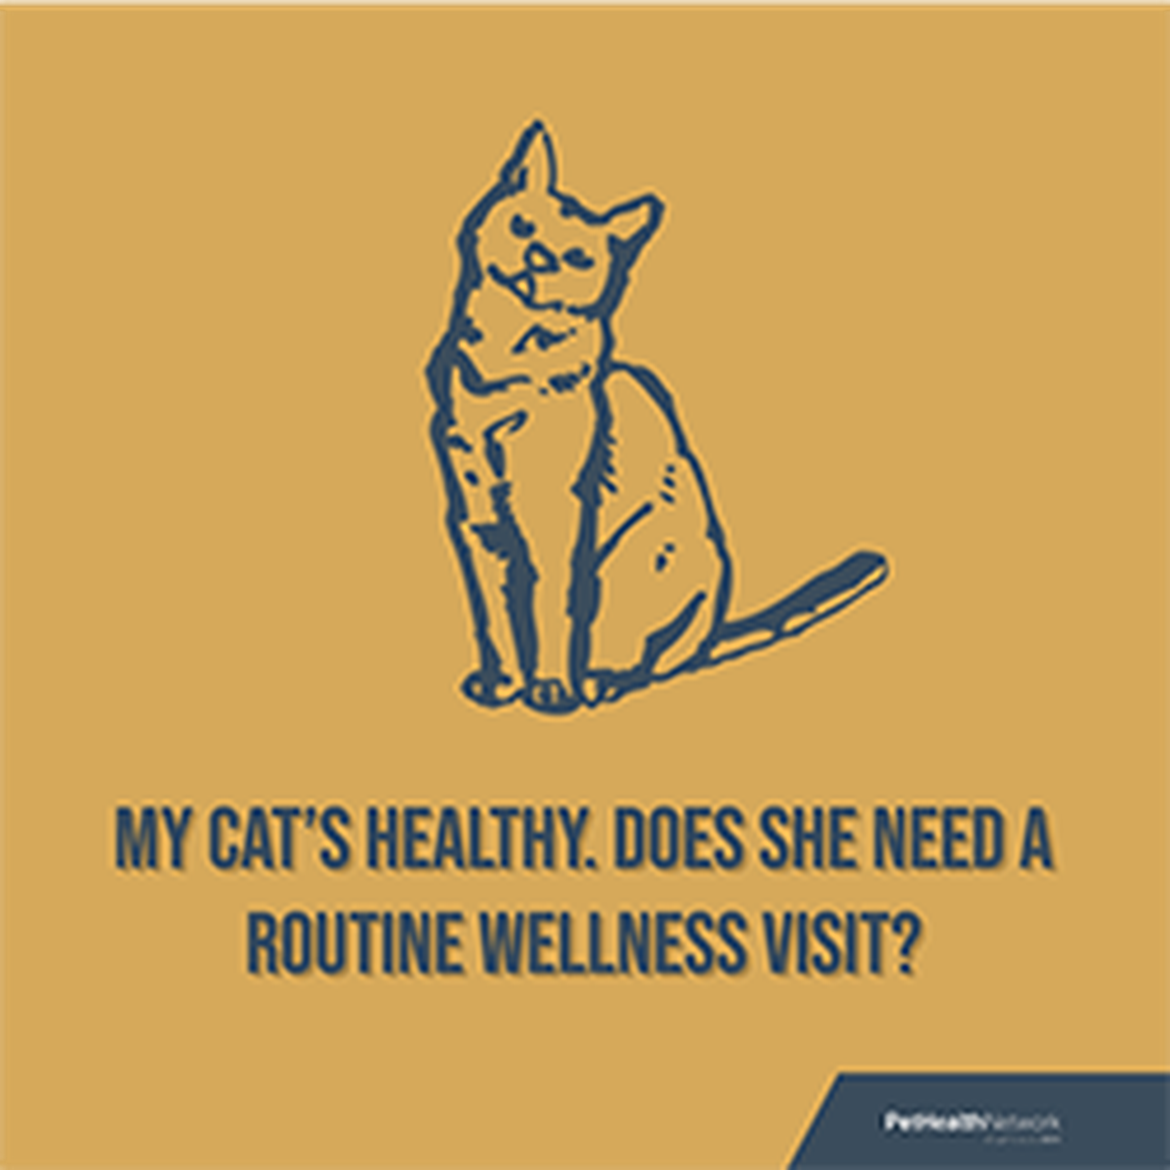 Social media post on a wellness visit for cats.